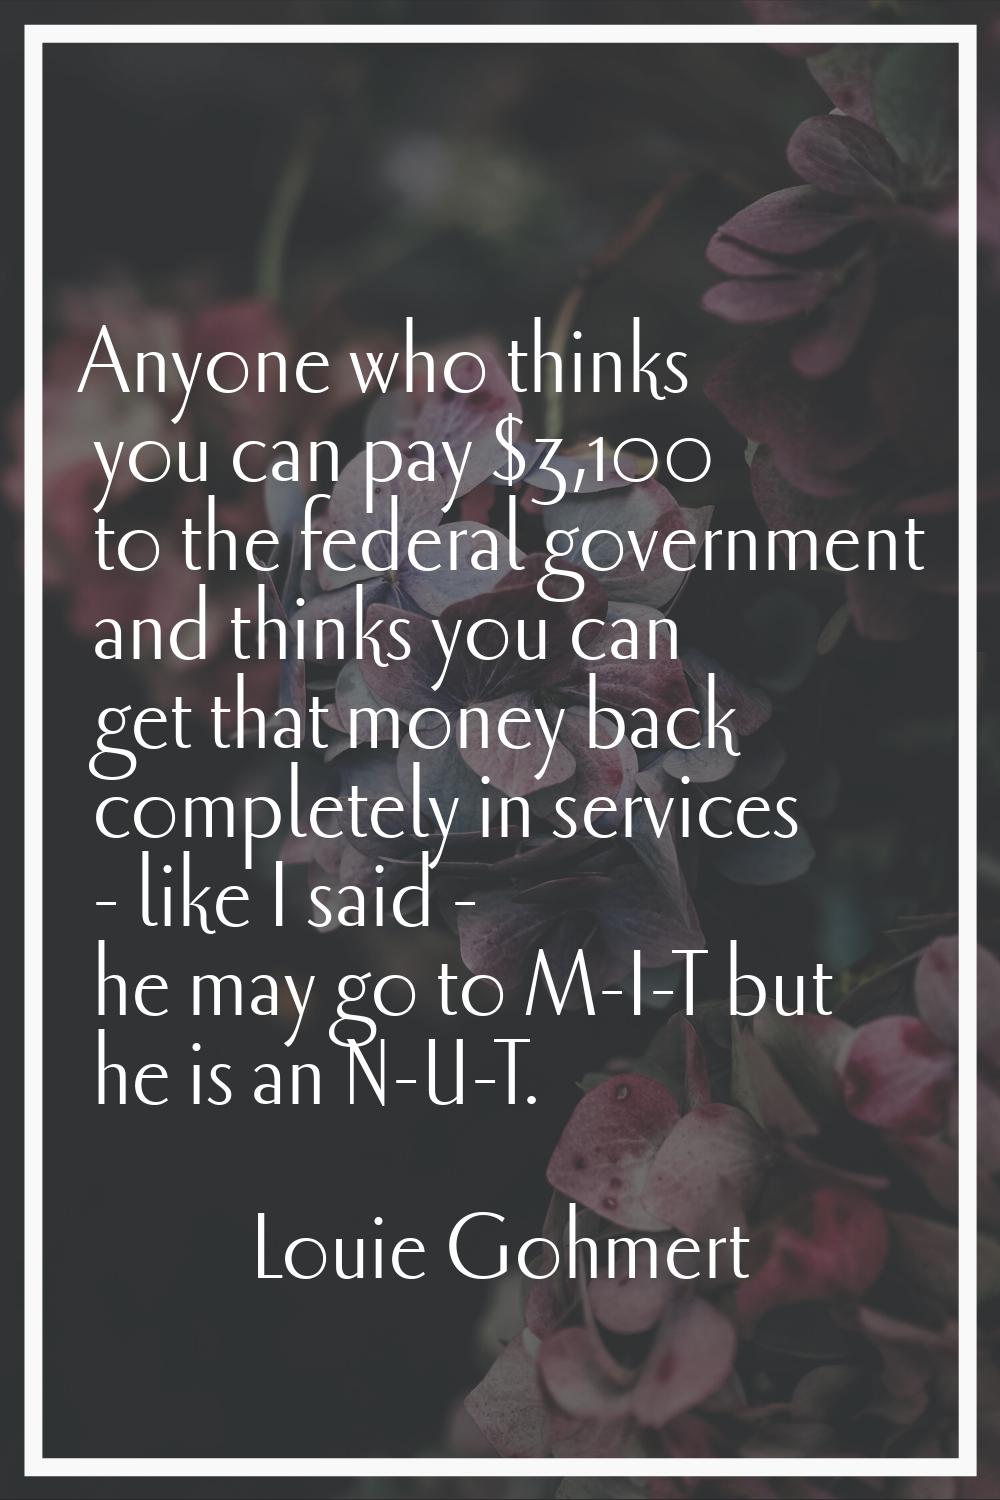 Anyone who thinks you can pay $3,100 to the federal government and thinks you can get that money ba